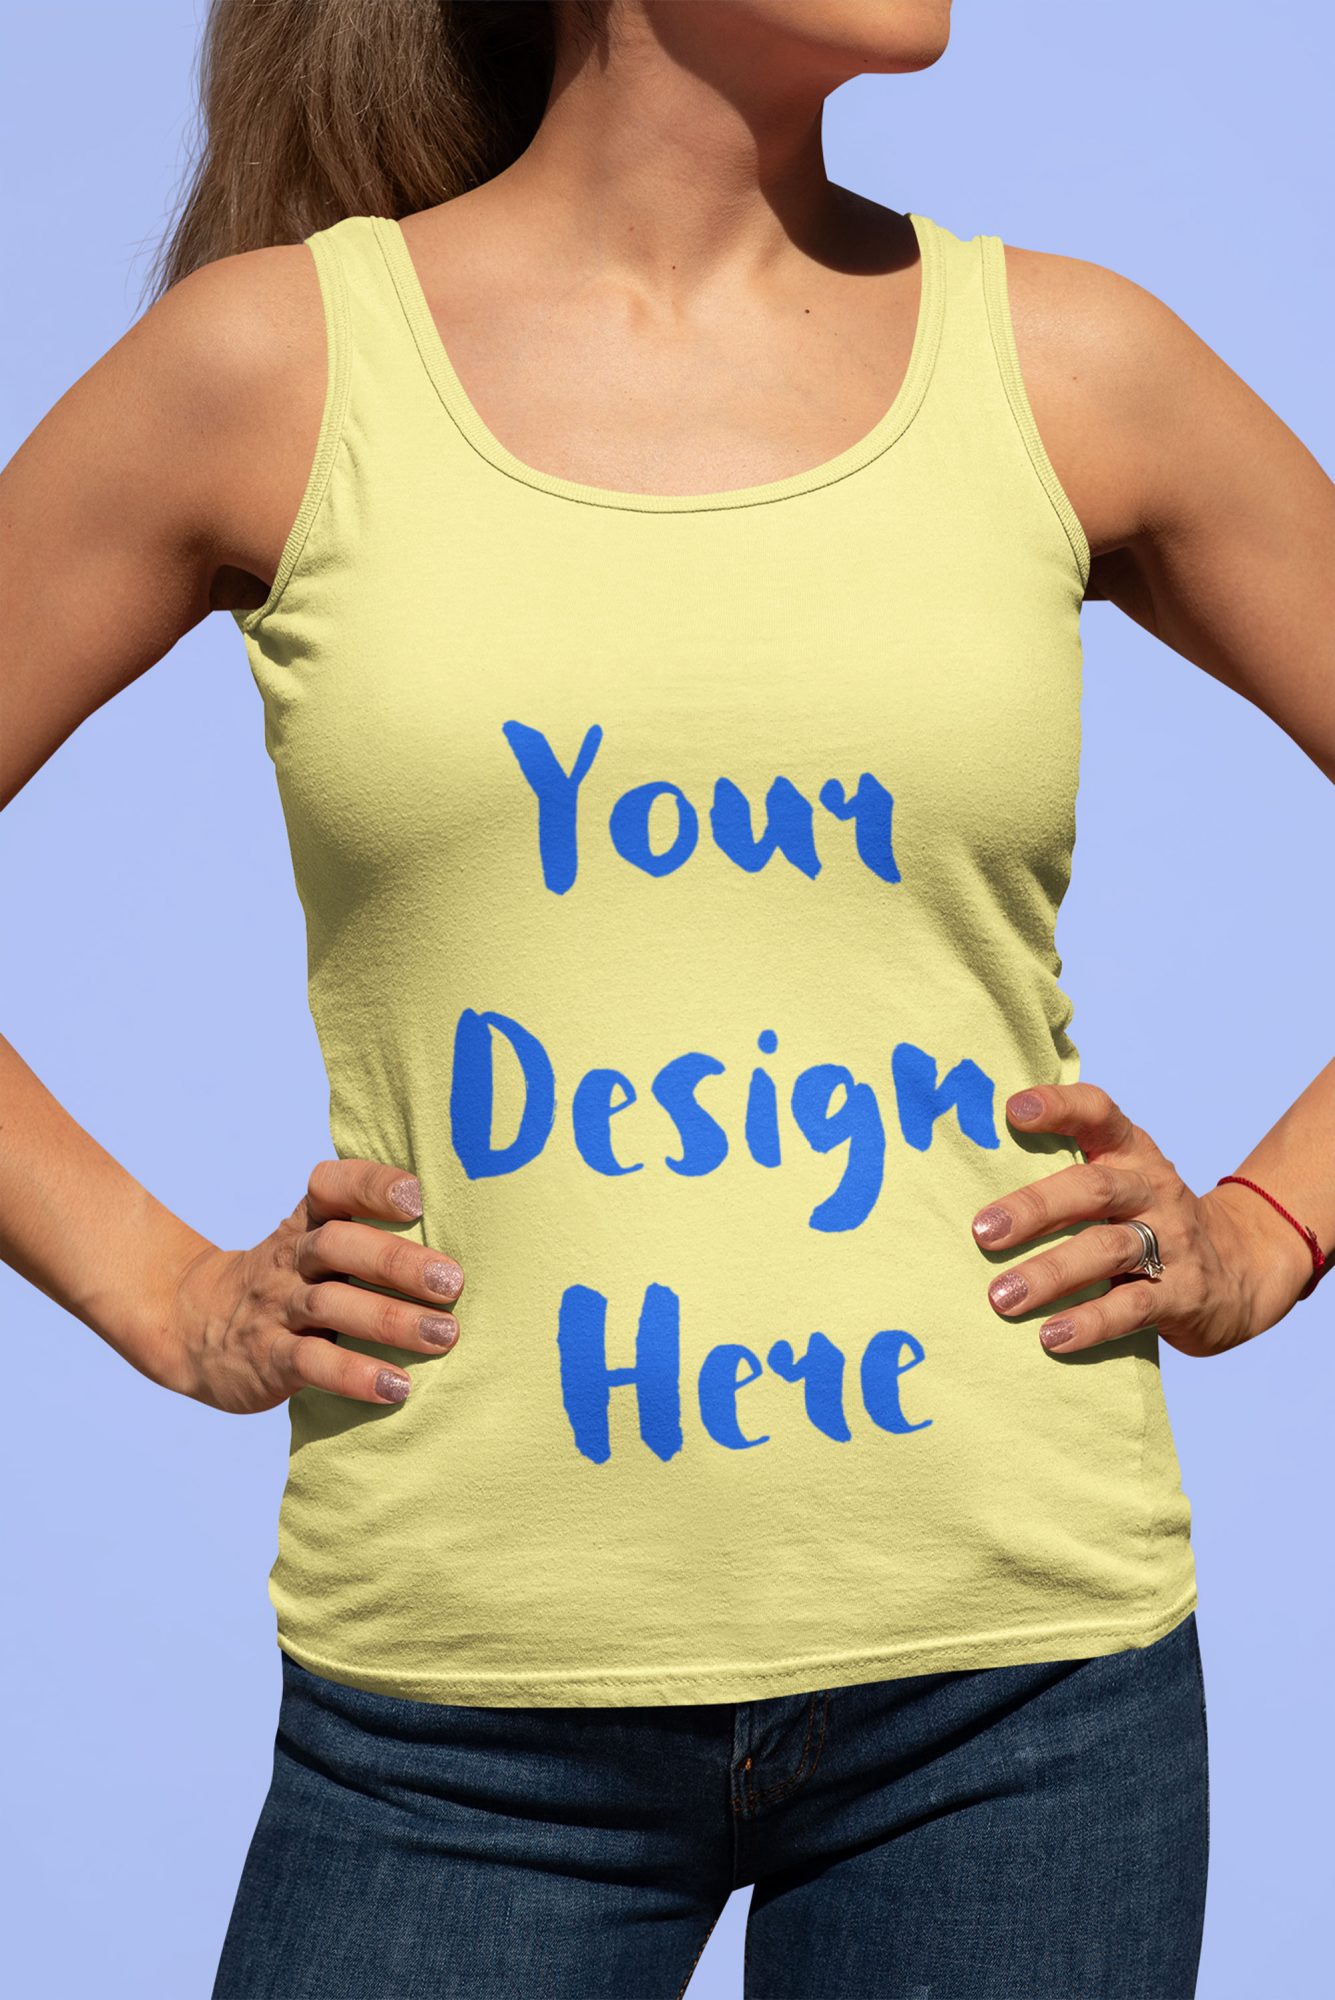 Tank top mockup of a woman with a power pose